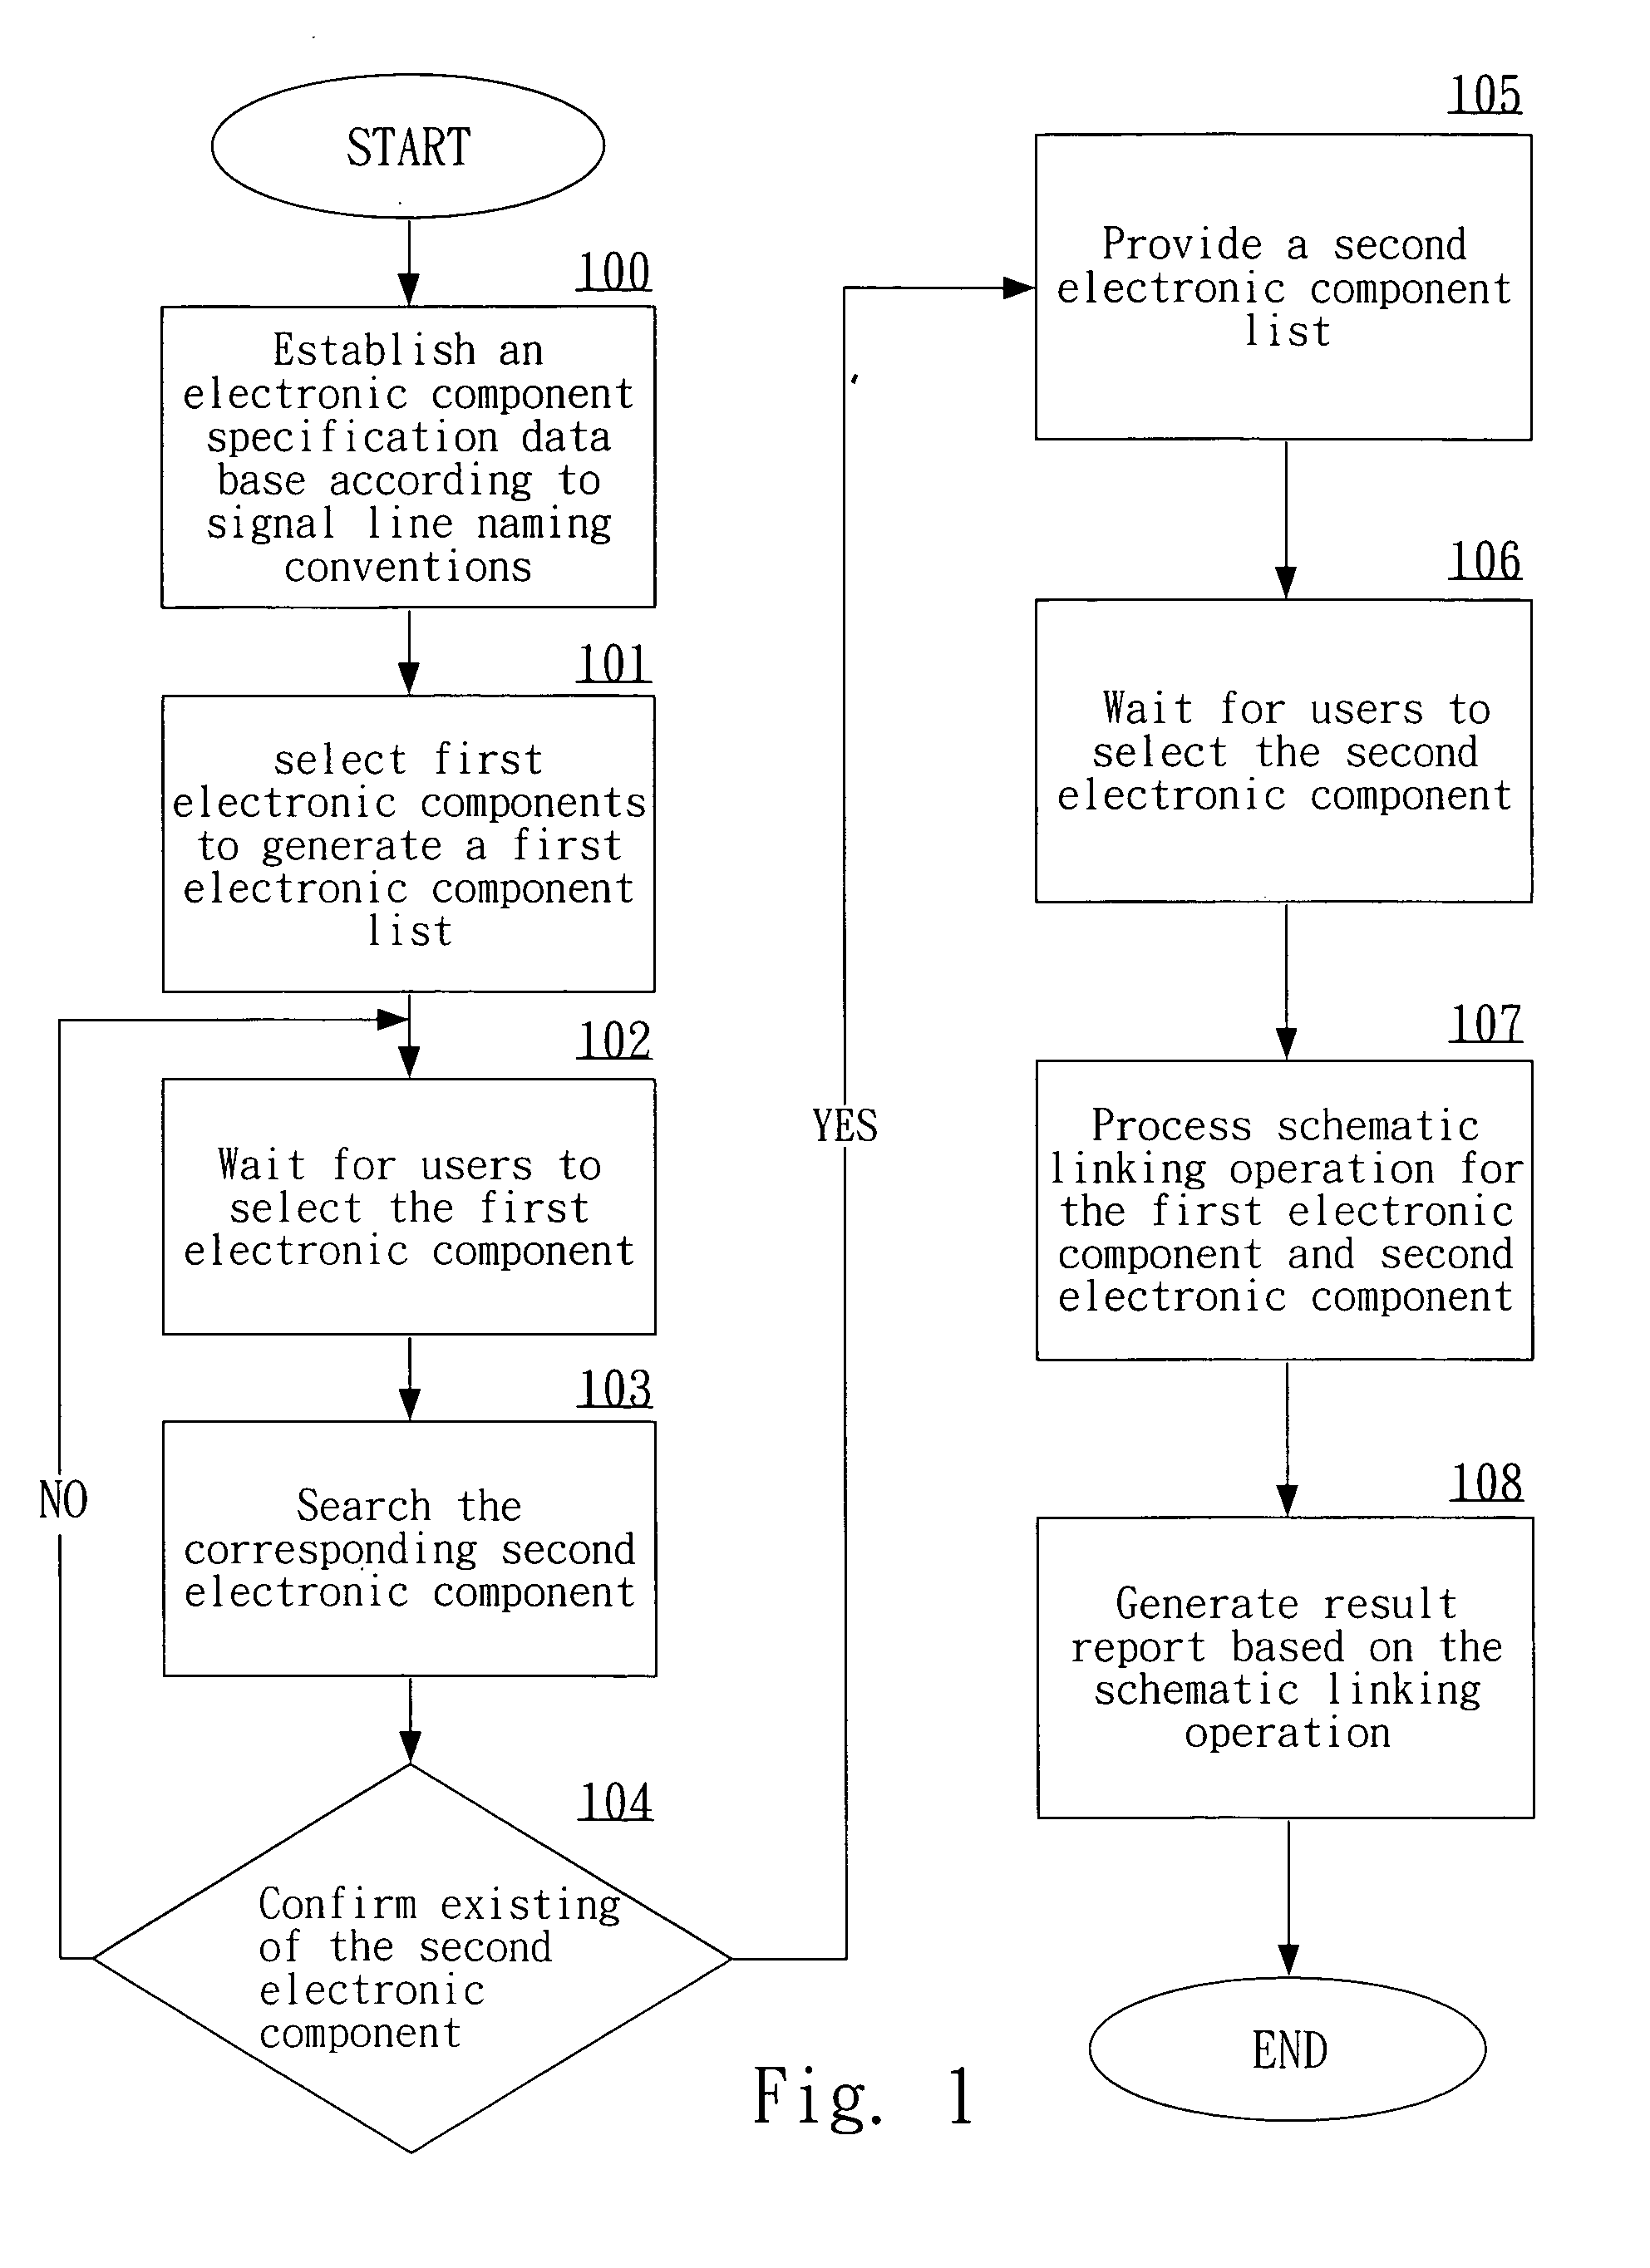 Computer-assisted electronic component schematic linking method